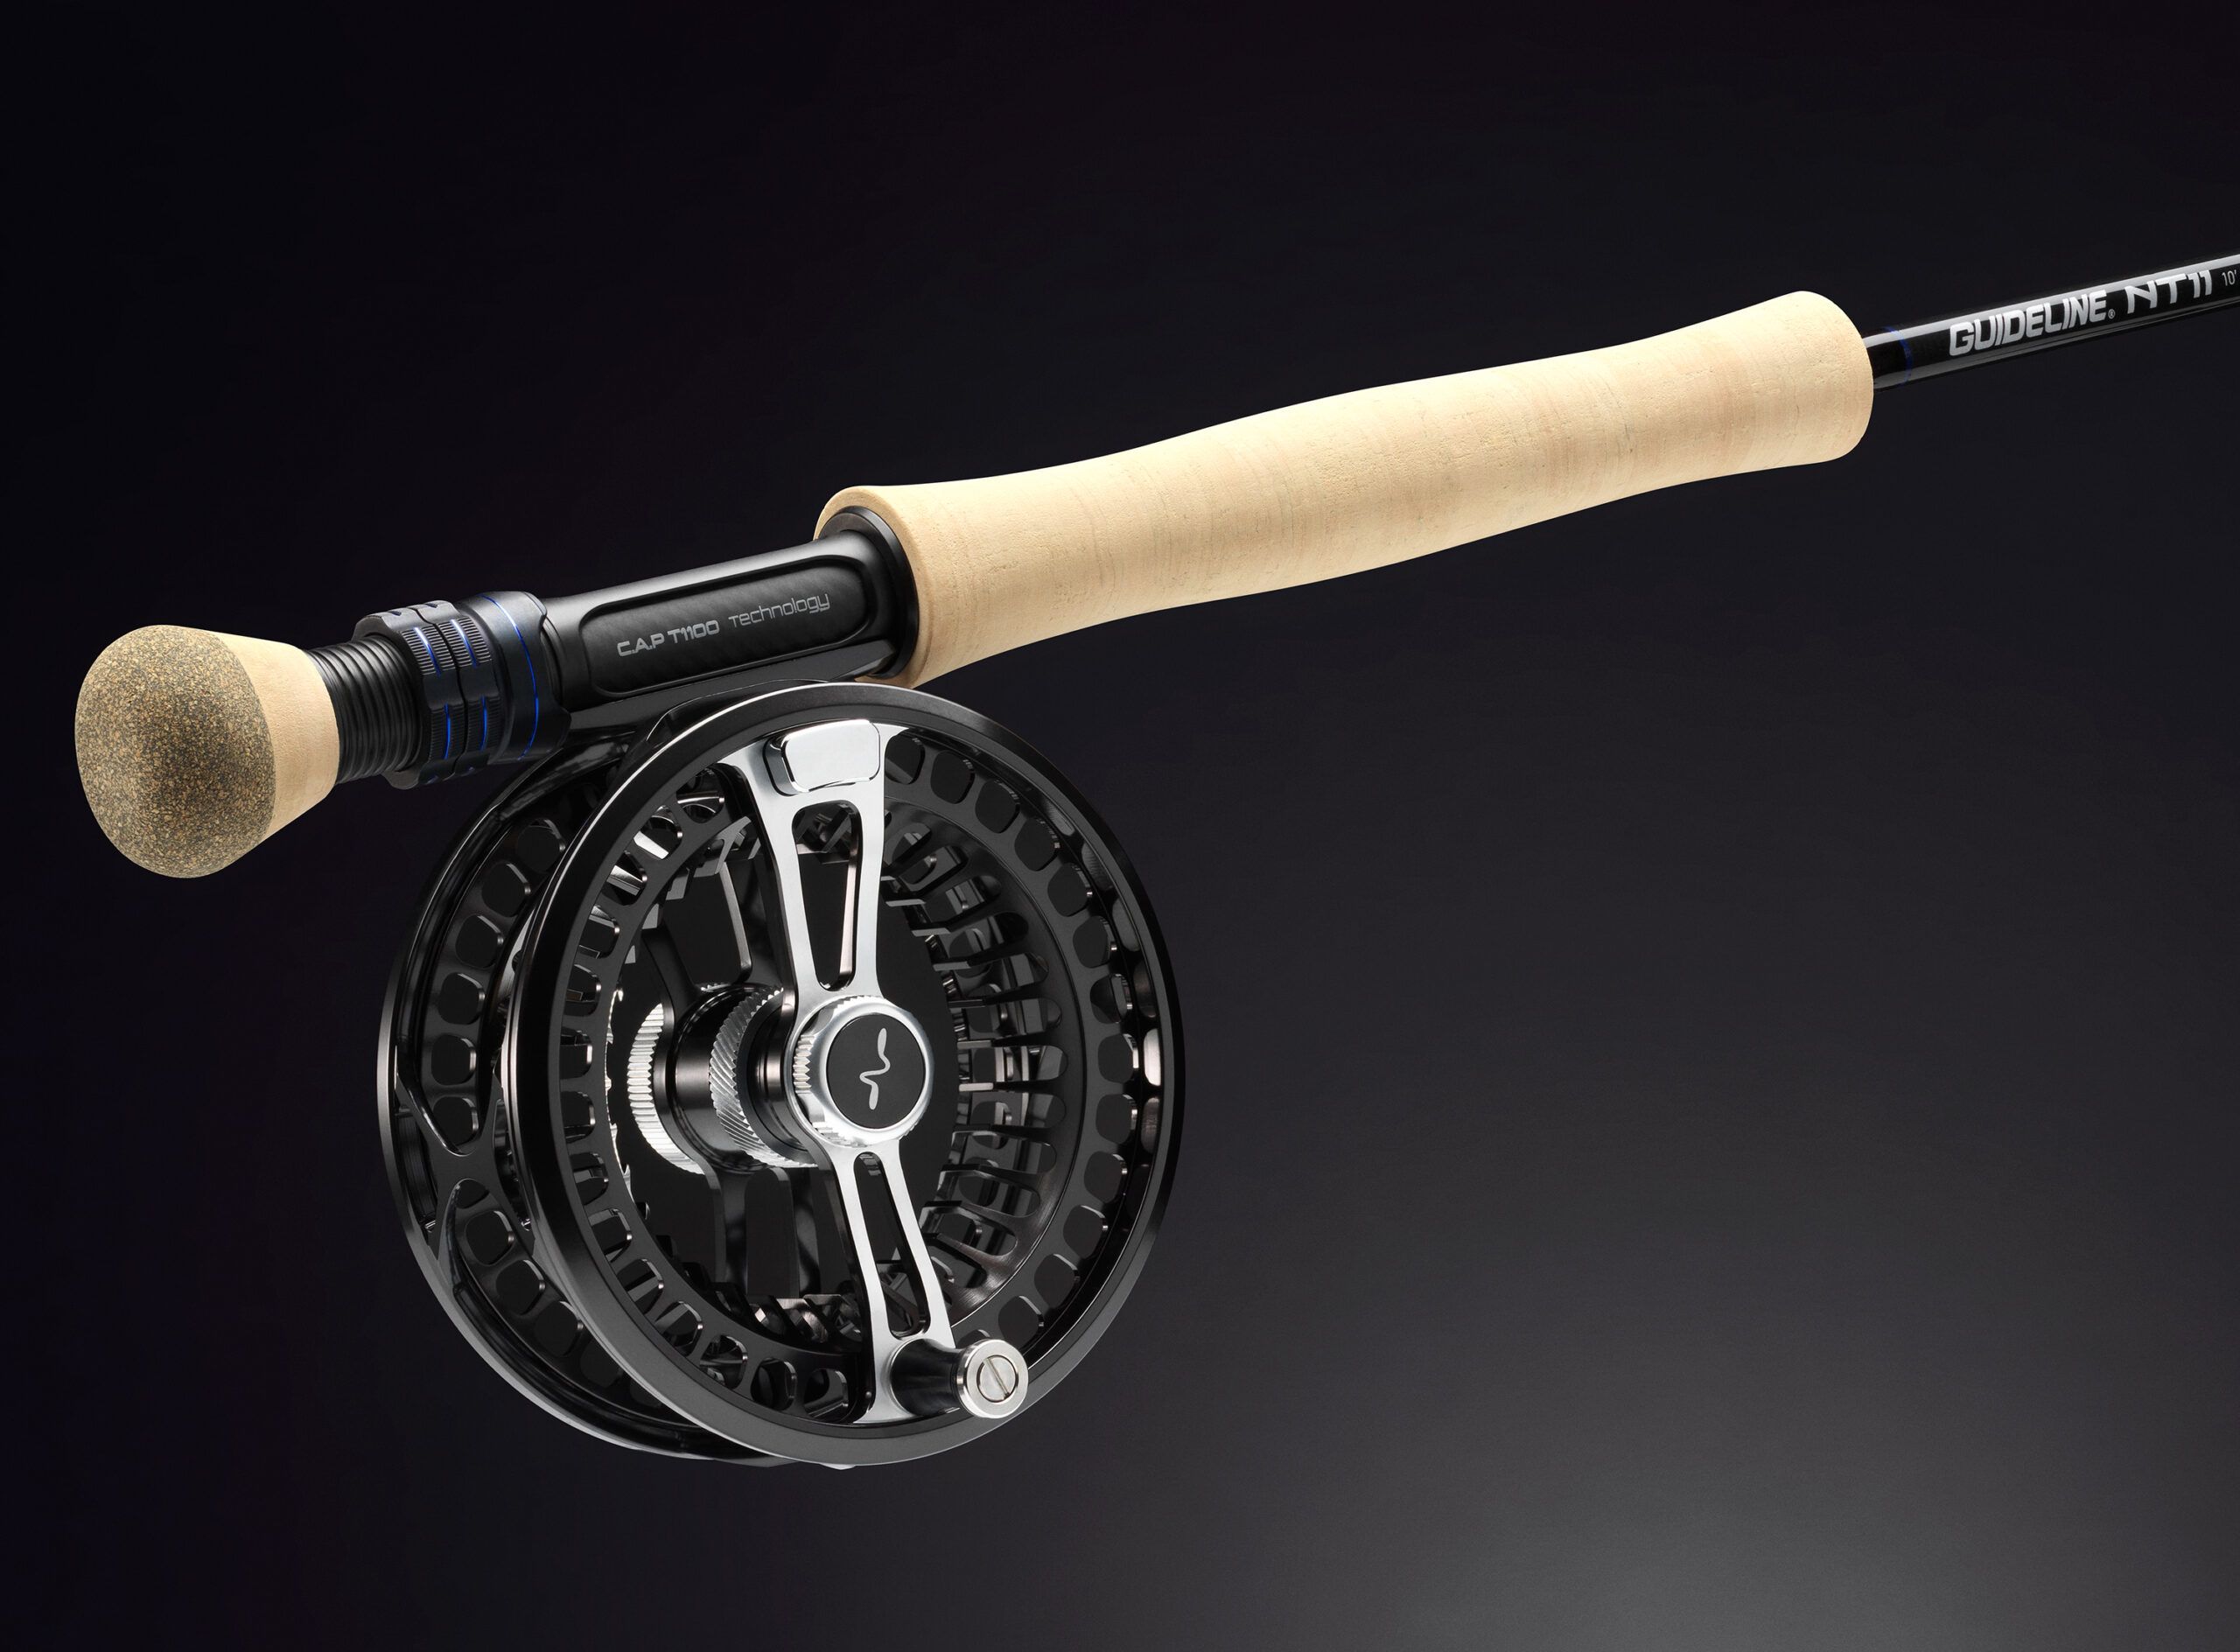 Guideline NT11 Salmon & Seatrout Series Fly Rod - Fin & Game